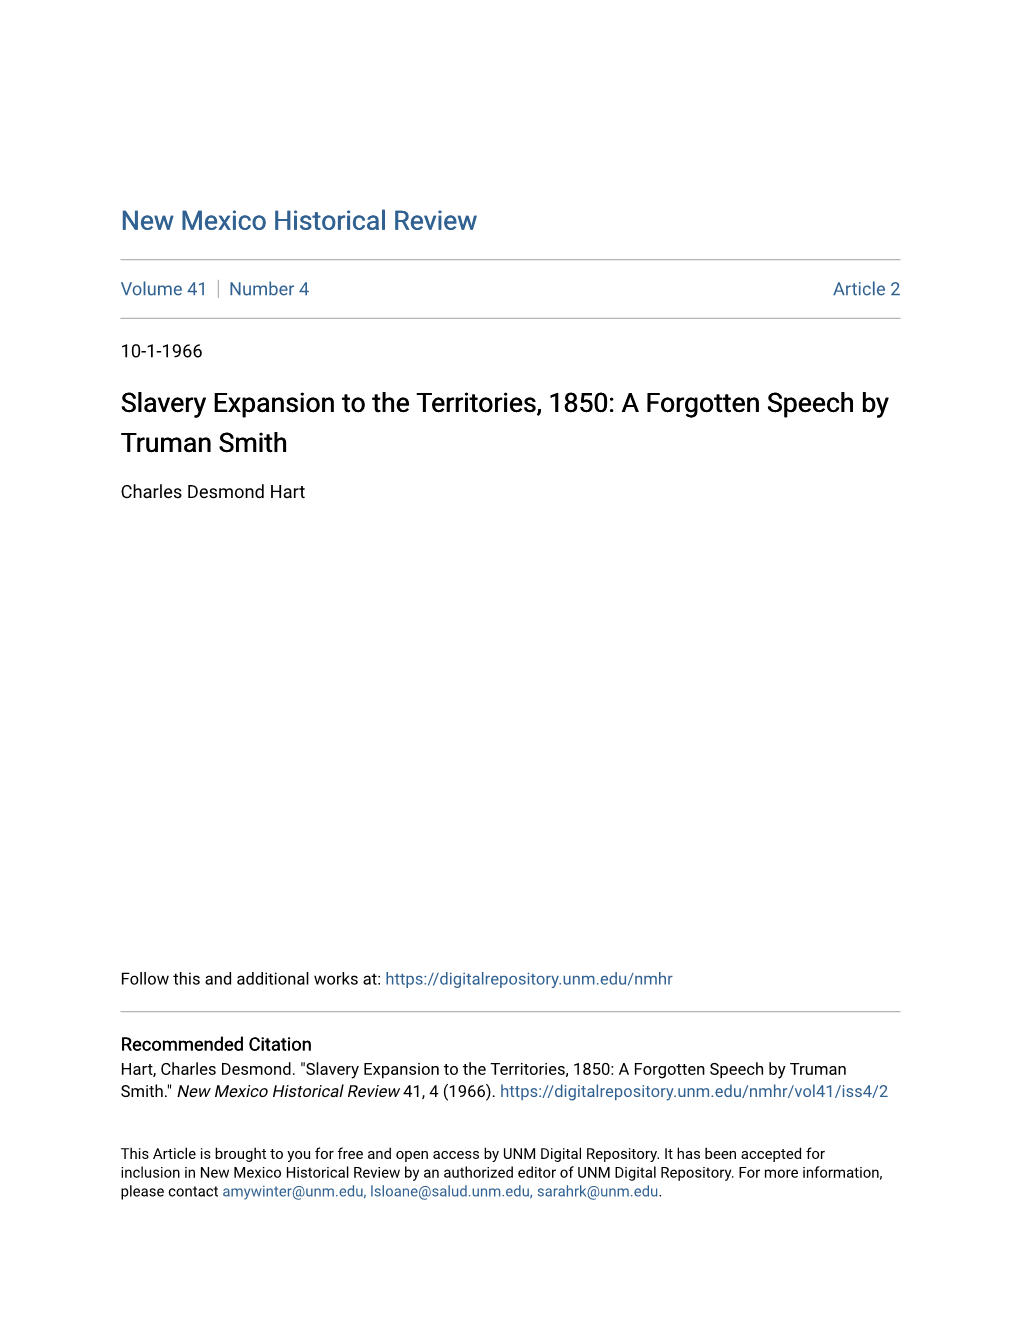 Slavery Expansion to the Territories, 1850: a Forgotten Speech by Truman Smith